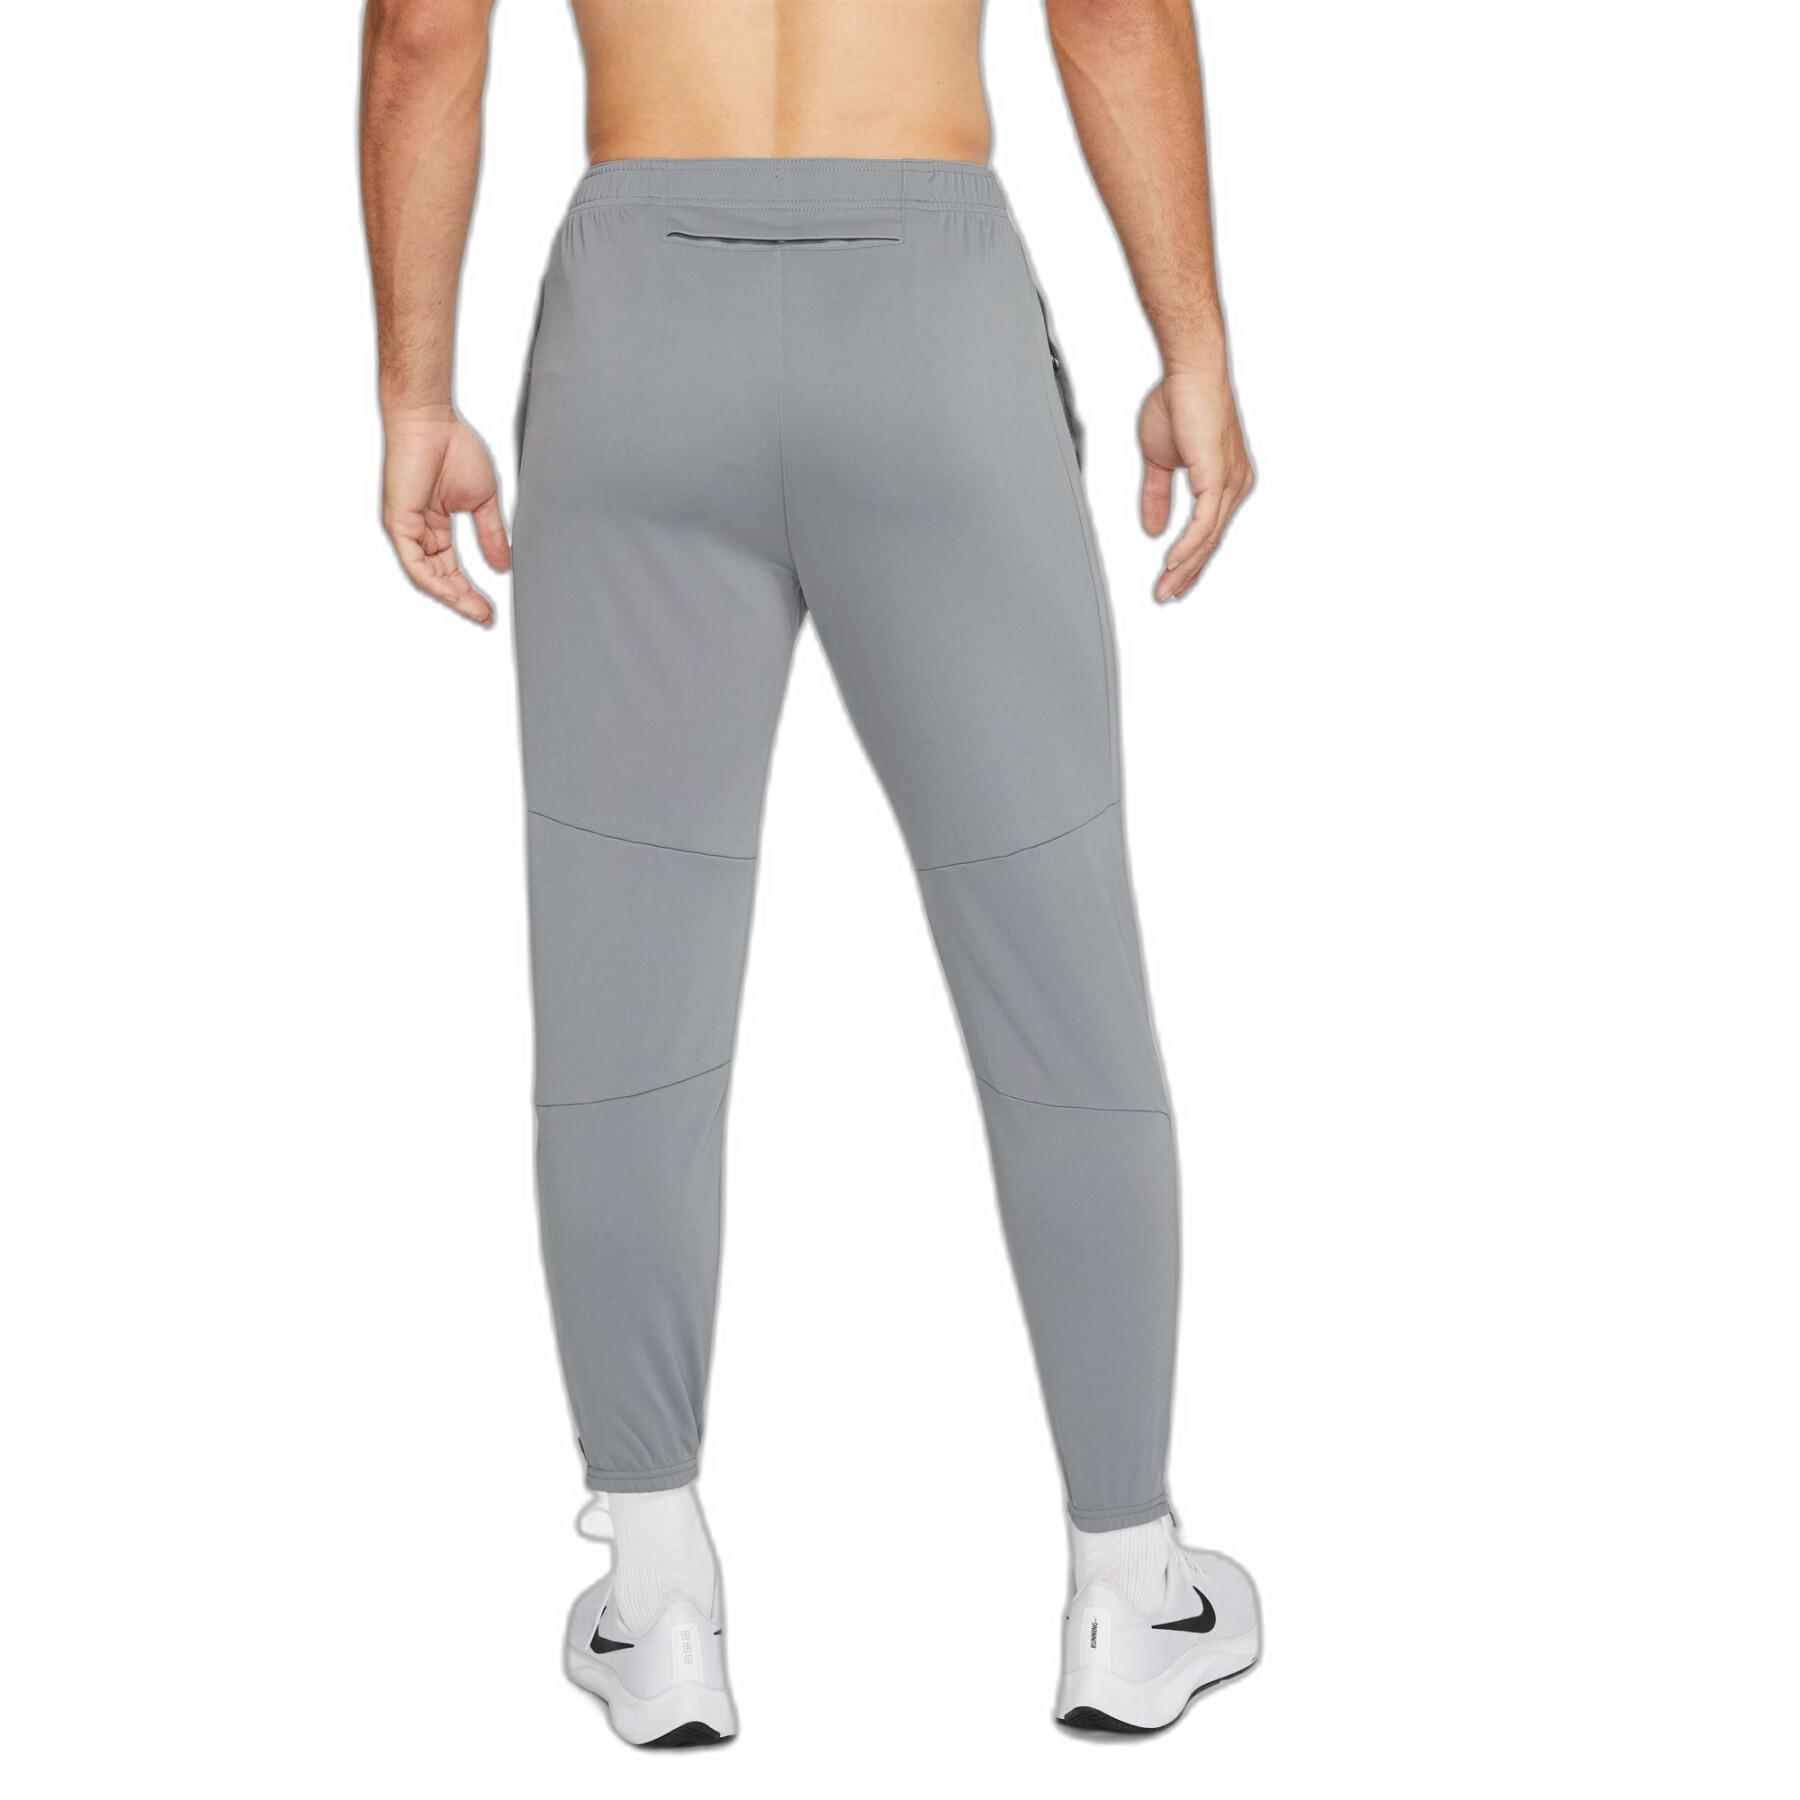 Jogging Nike Dri-FIT Challenger - Pants / Jogging suits - The Stockings ...